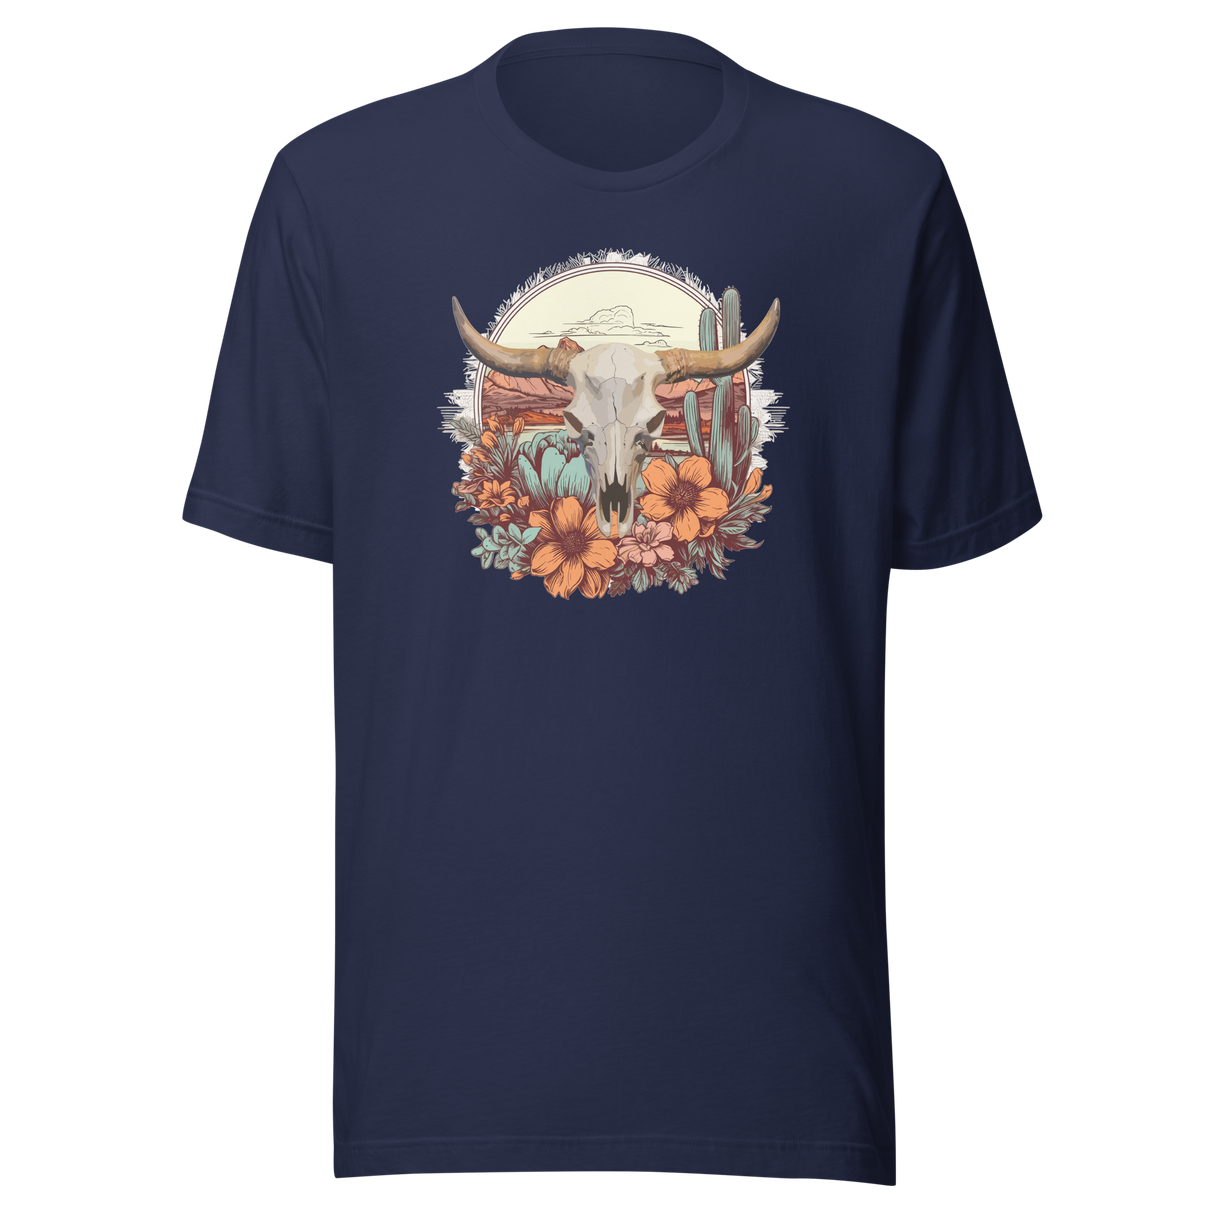 desert-scene-with-skull-and-flowers-mountains-outdoors-tee-desert-t-shirt-outdoors-tee-t-shirt-t-shirt-women-tee#color_navy